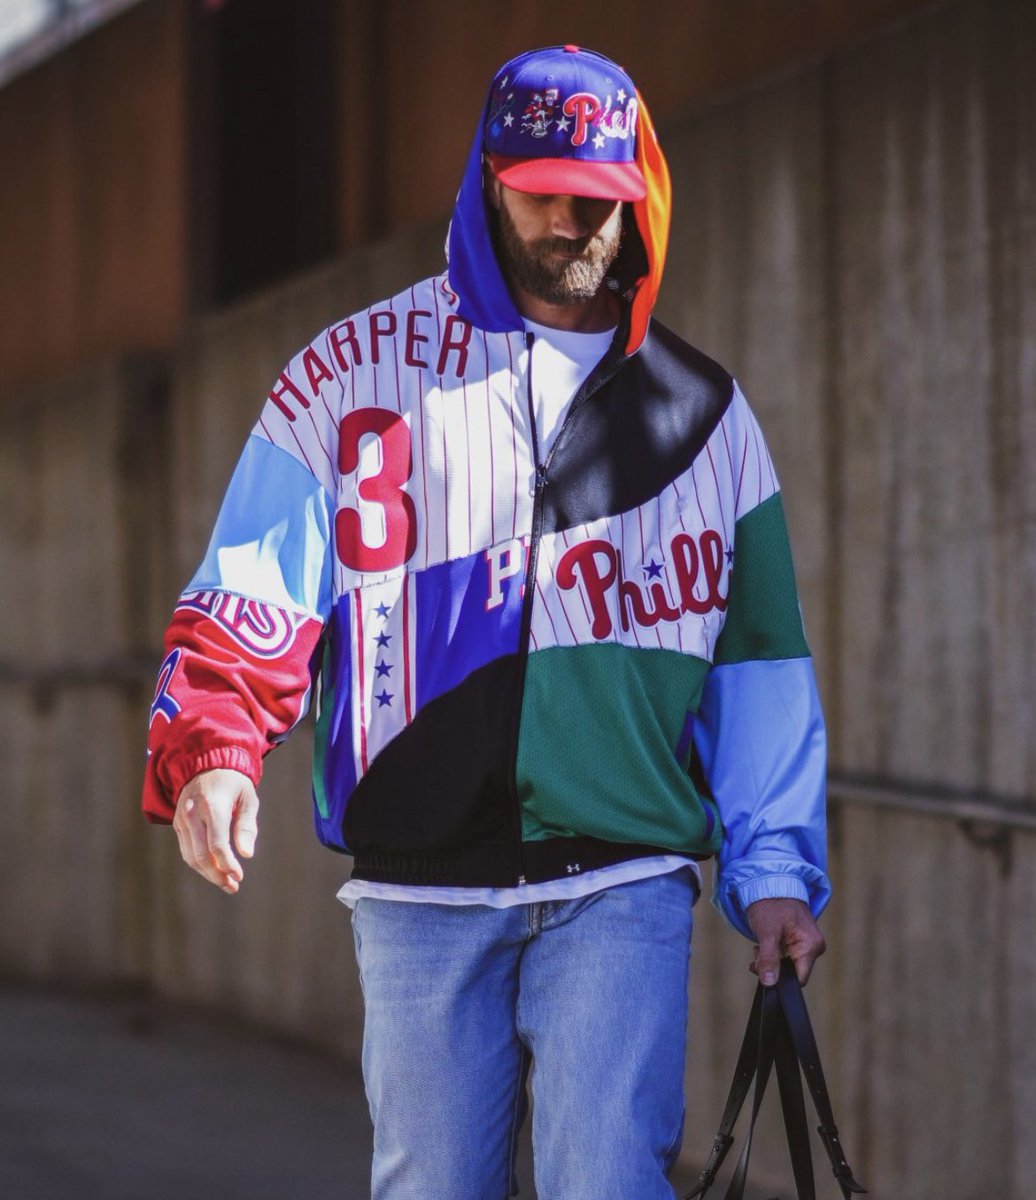 Bryce Harper arriving for opening day repping all the Philly teams #OpeningDay 📸 @Phillies